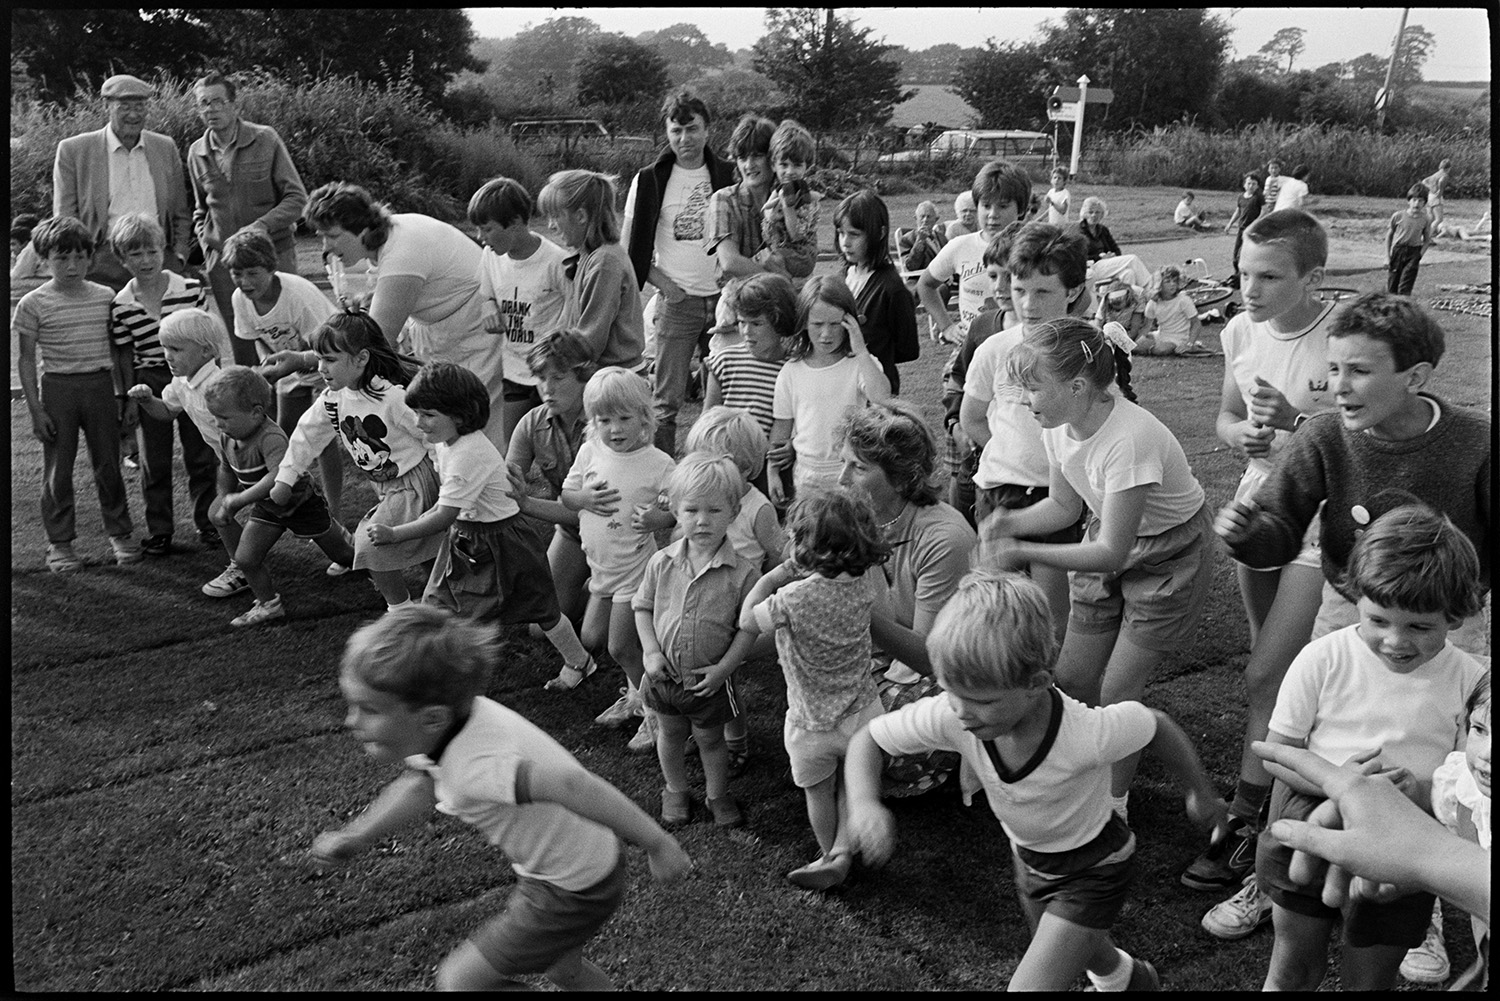 Children's sports.
[A group of children gathered in a field for a race on Sports Day at Chulmleigh.]